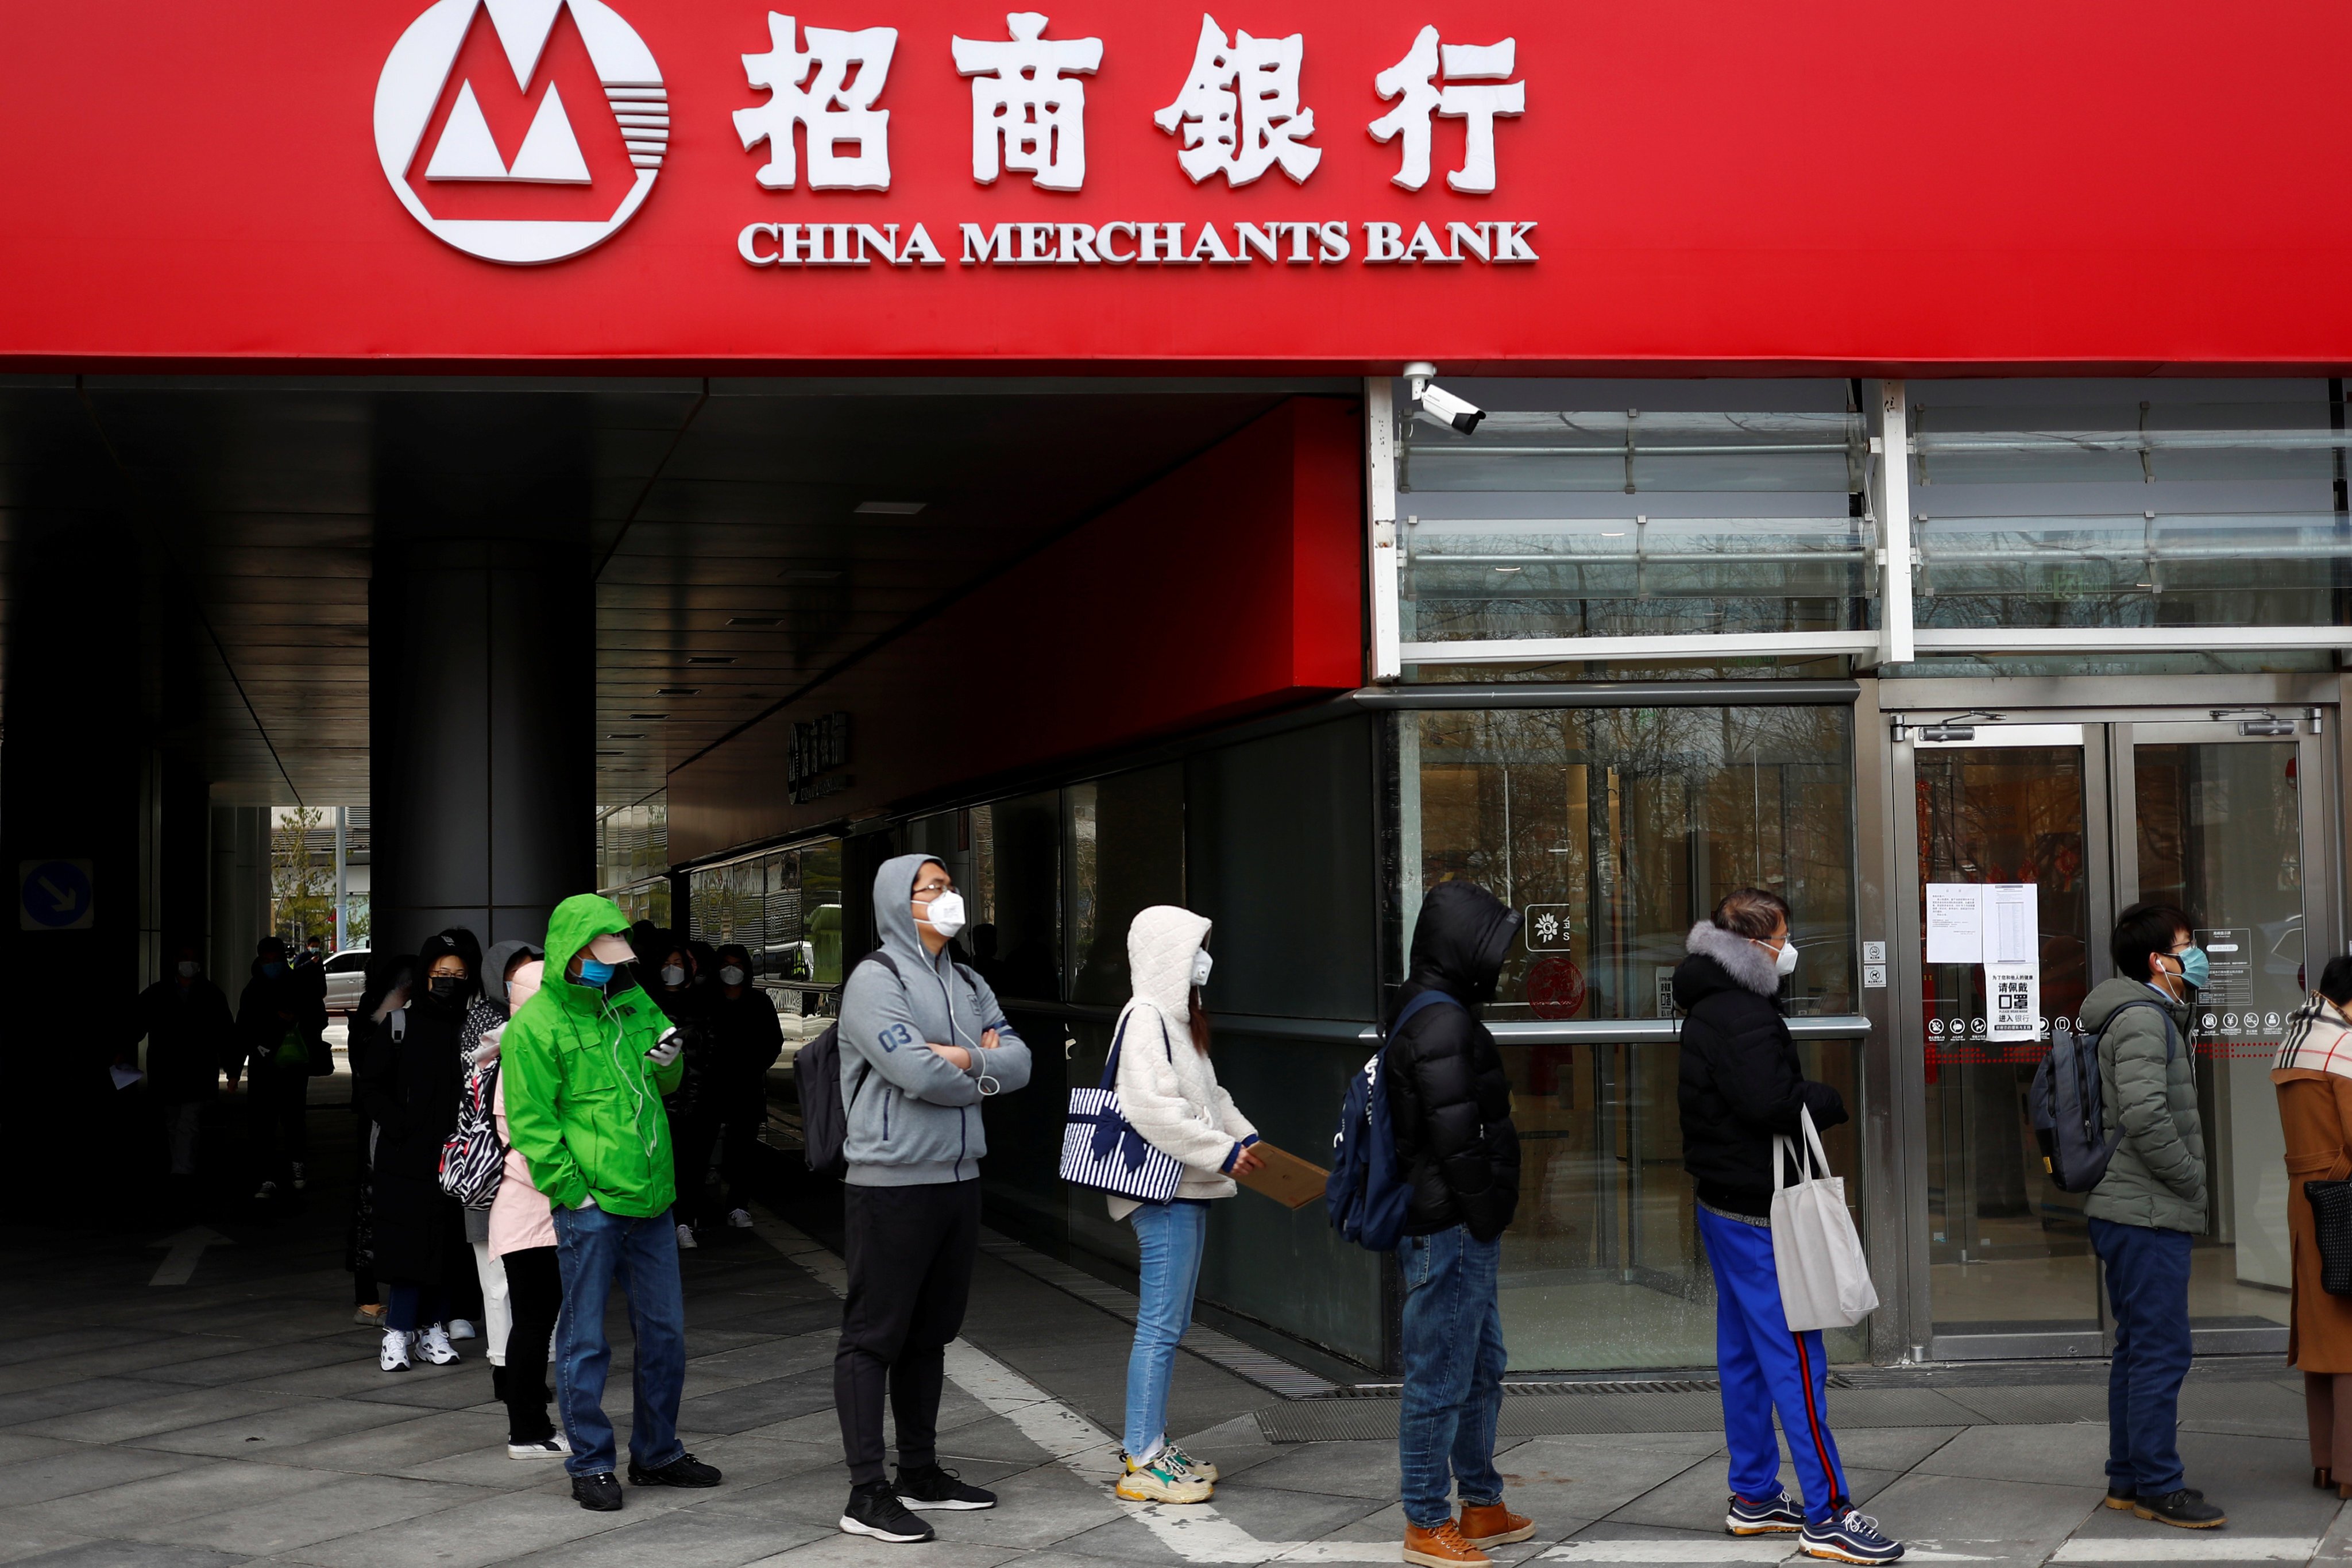 People wearing face masks line up near a branch of China Merchants Bank in Beijing in March 2020. Photo: Reuters